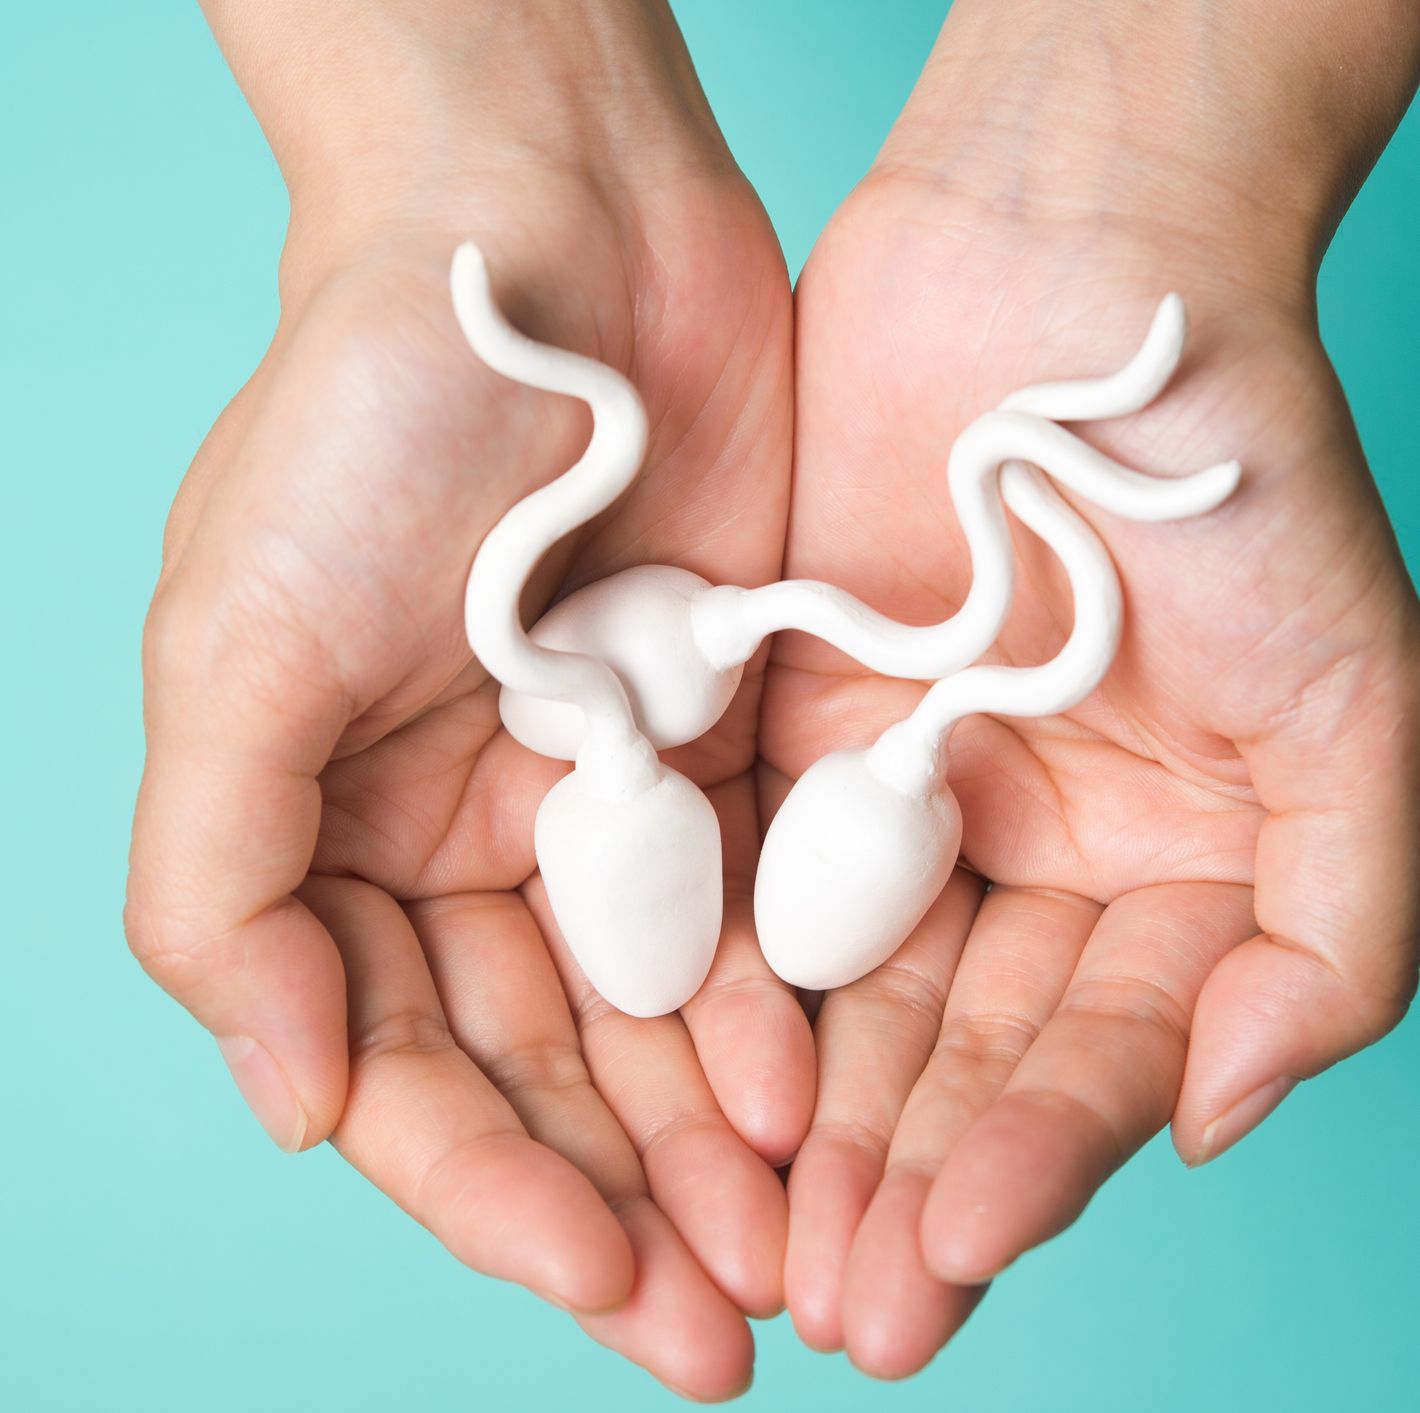 Is Your Sperm Healthy? Doctors Explain How to Tell.